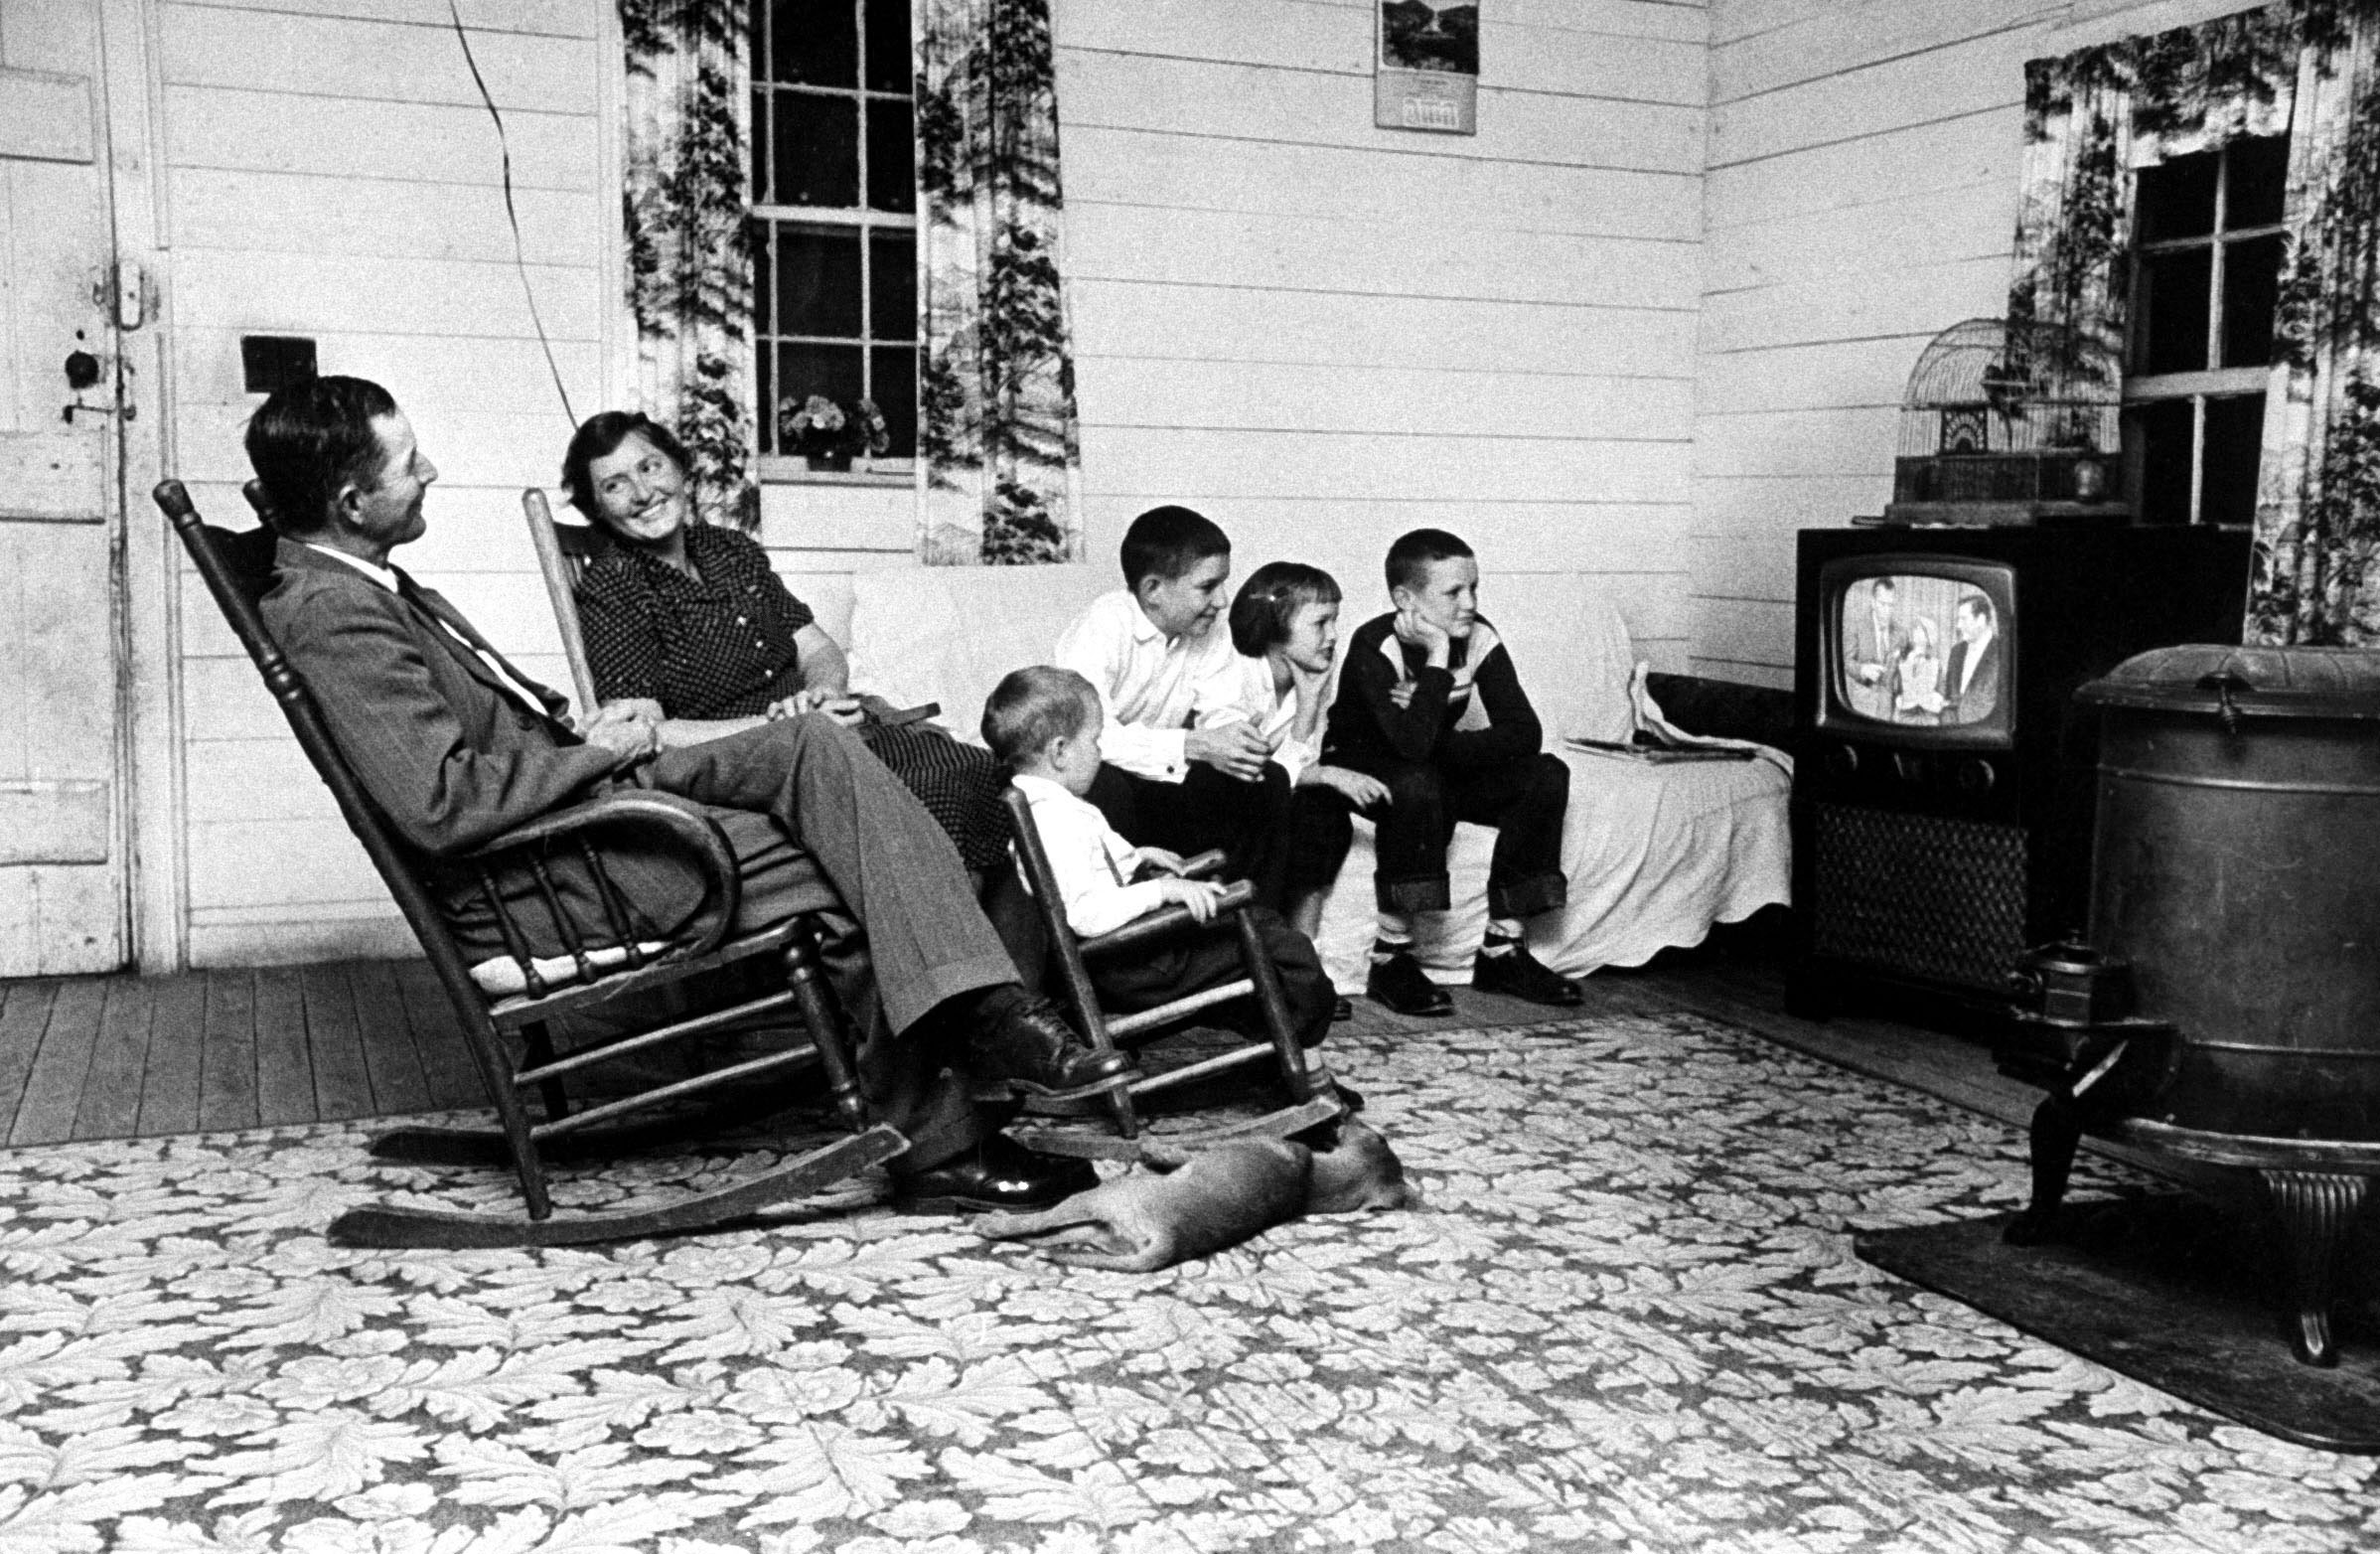 Tenant farmer Thomas B. Knox and his family watch Ed Sullivan and ventriloquist Rickie Layne on The Ed Sullivan Show in 1958.